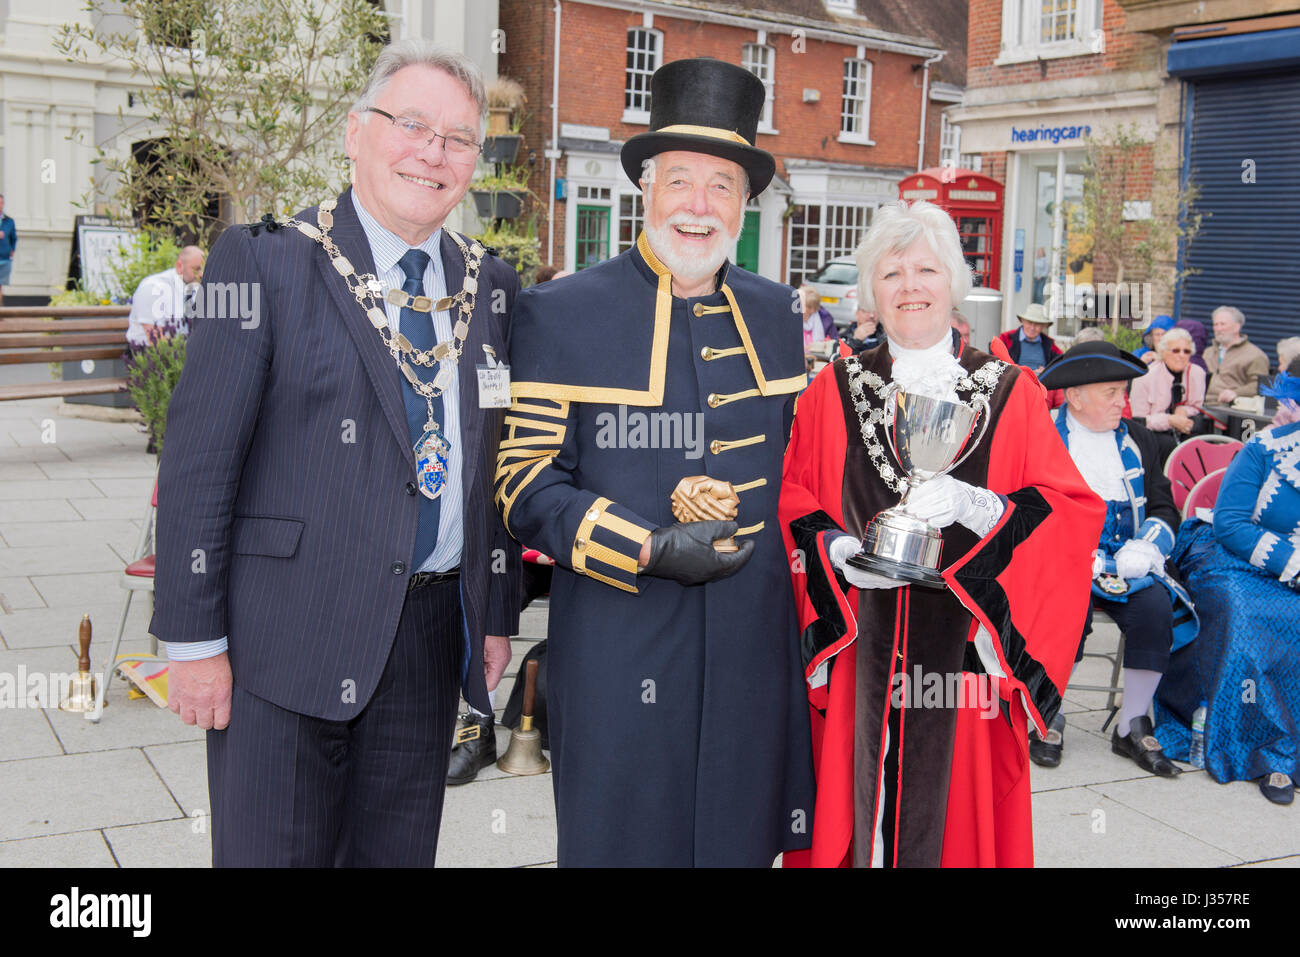 Winner Best Dressed Town Crier - Peter White. Awards presented by Mayor of Wimborne Councillor Sue Cook and Chairmen for East Dorset District Council  Stock Photo